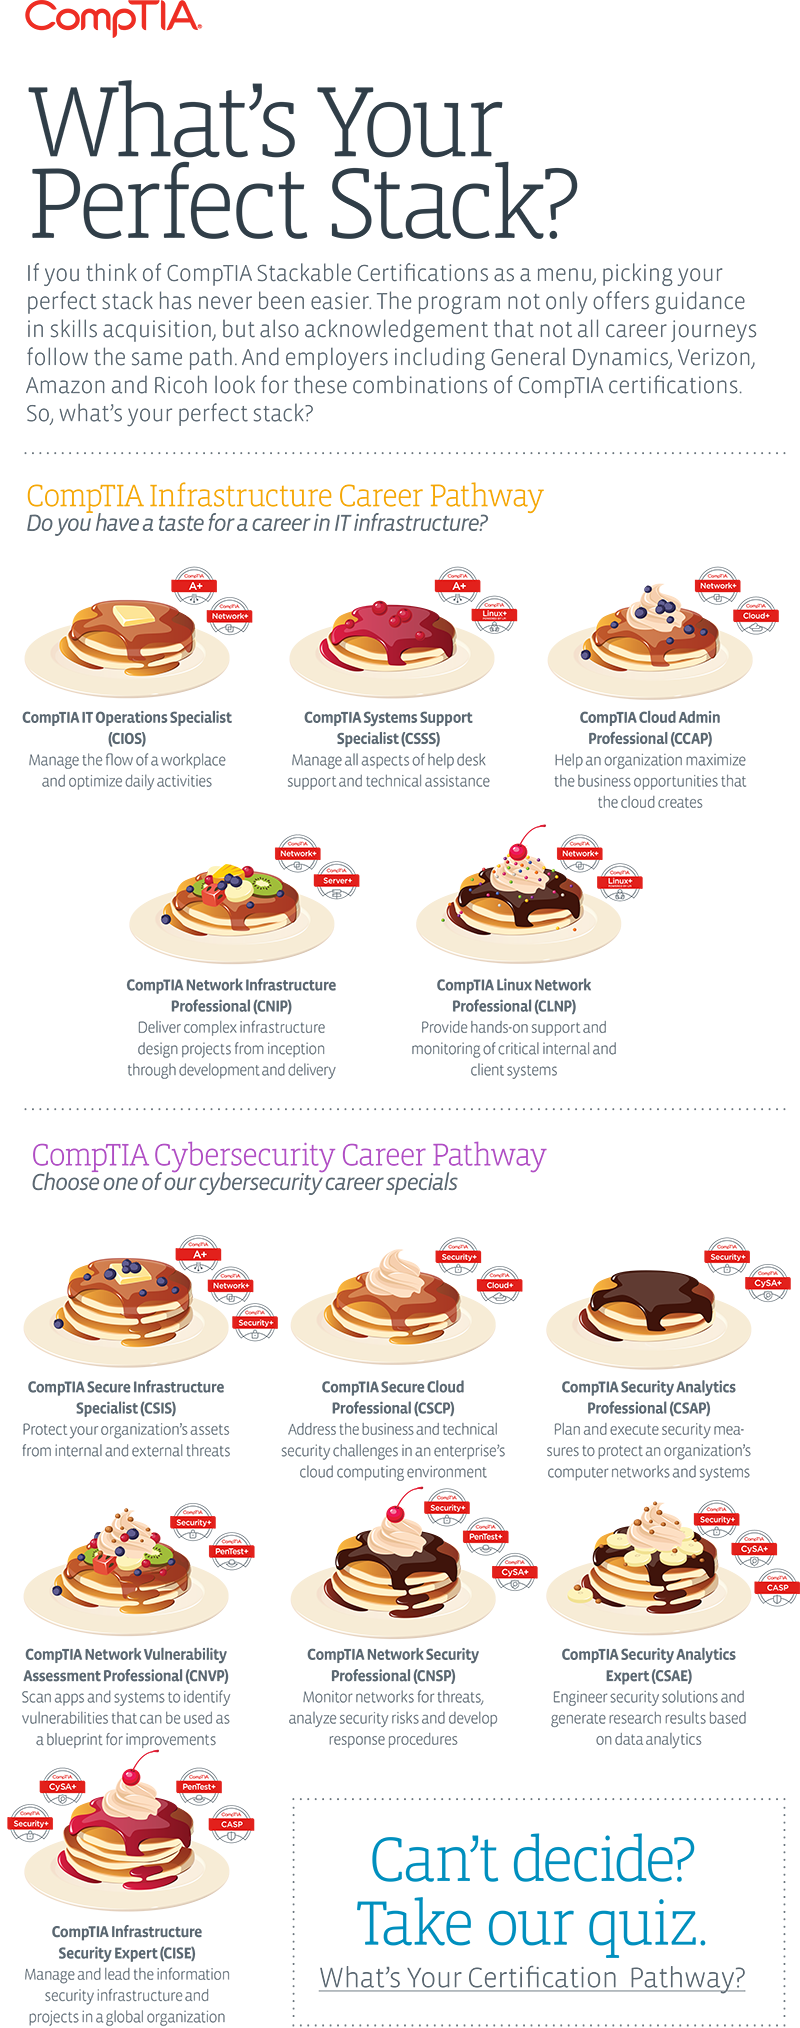 A menu of CompTIA Stackable Certifications, depicted as pancake stacks